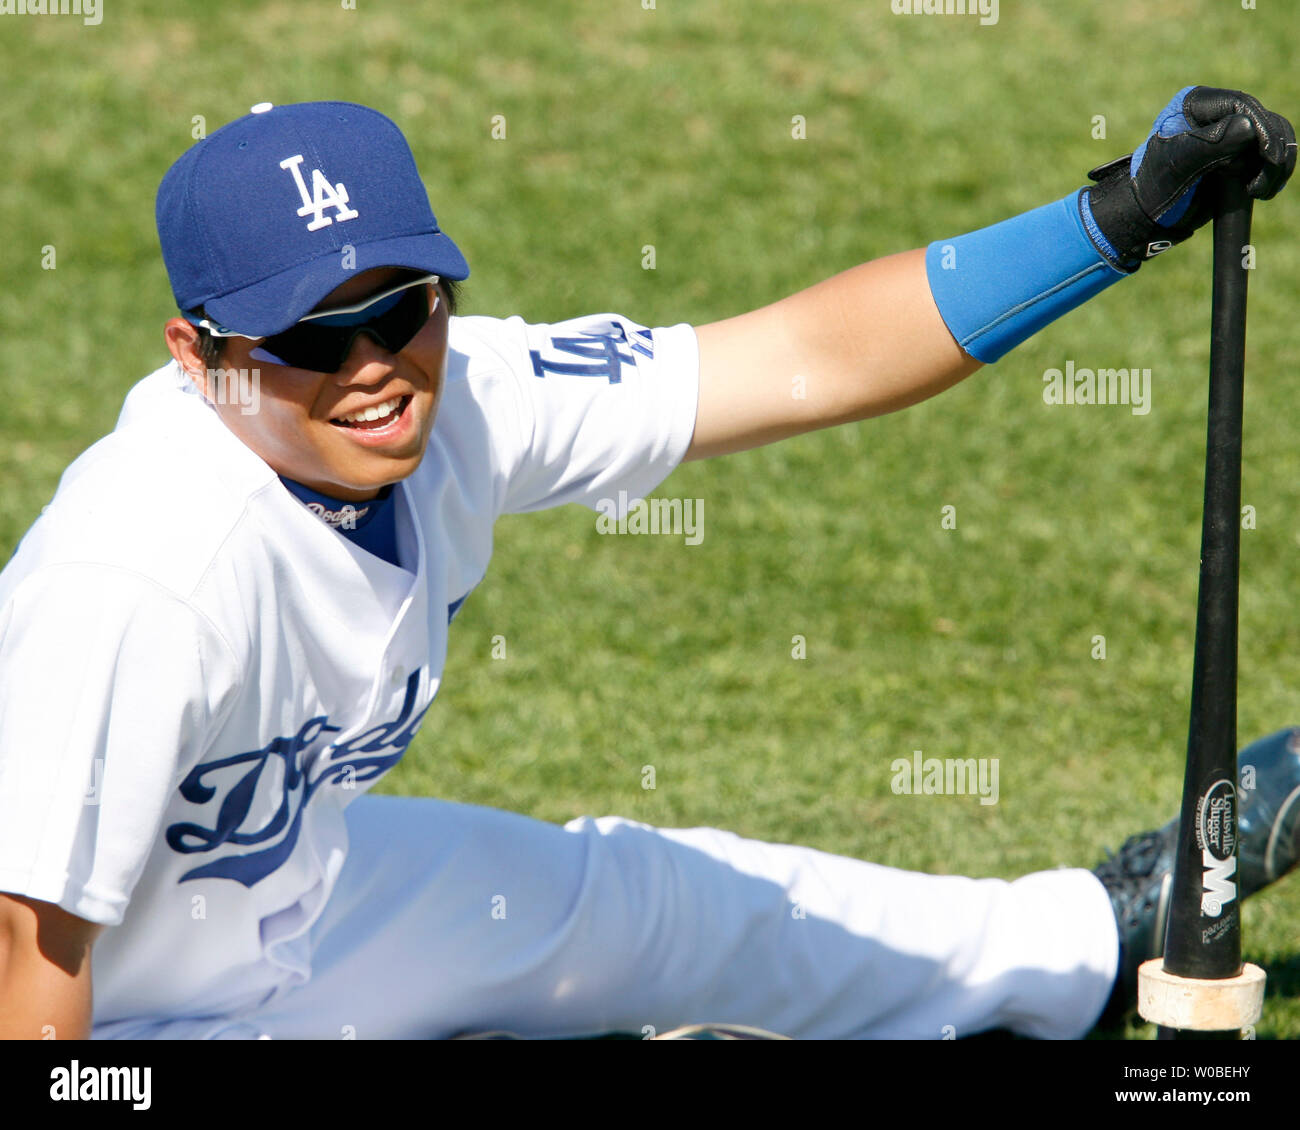 Los Angeles Dodgers infielder Chin Lung Hu stretches prior to the game with the St. Louis Cardinals at the Dodgertown in Vero Beach, Florida  March 7, 2007. The Cardinals beat the Dodgers  11-1.  (UPI Photo /Jon SooHoo) Stock Photo